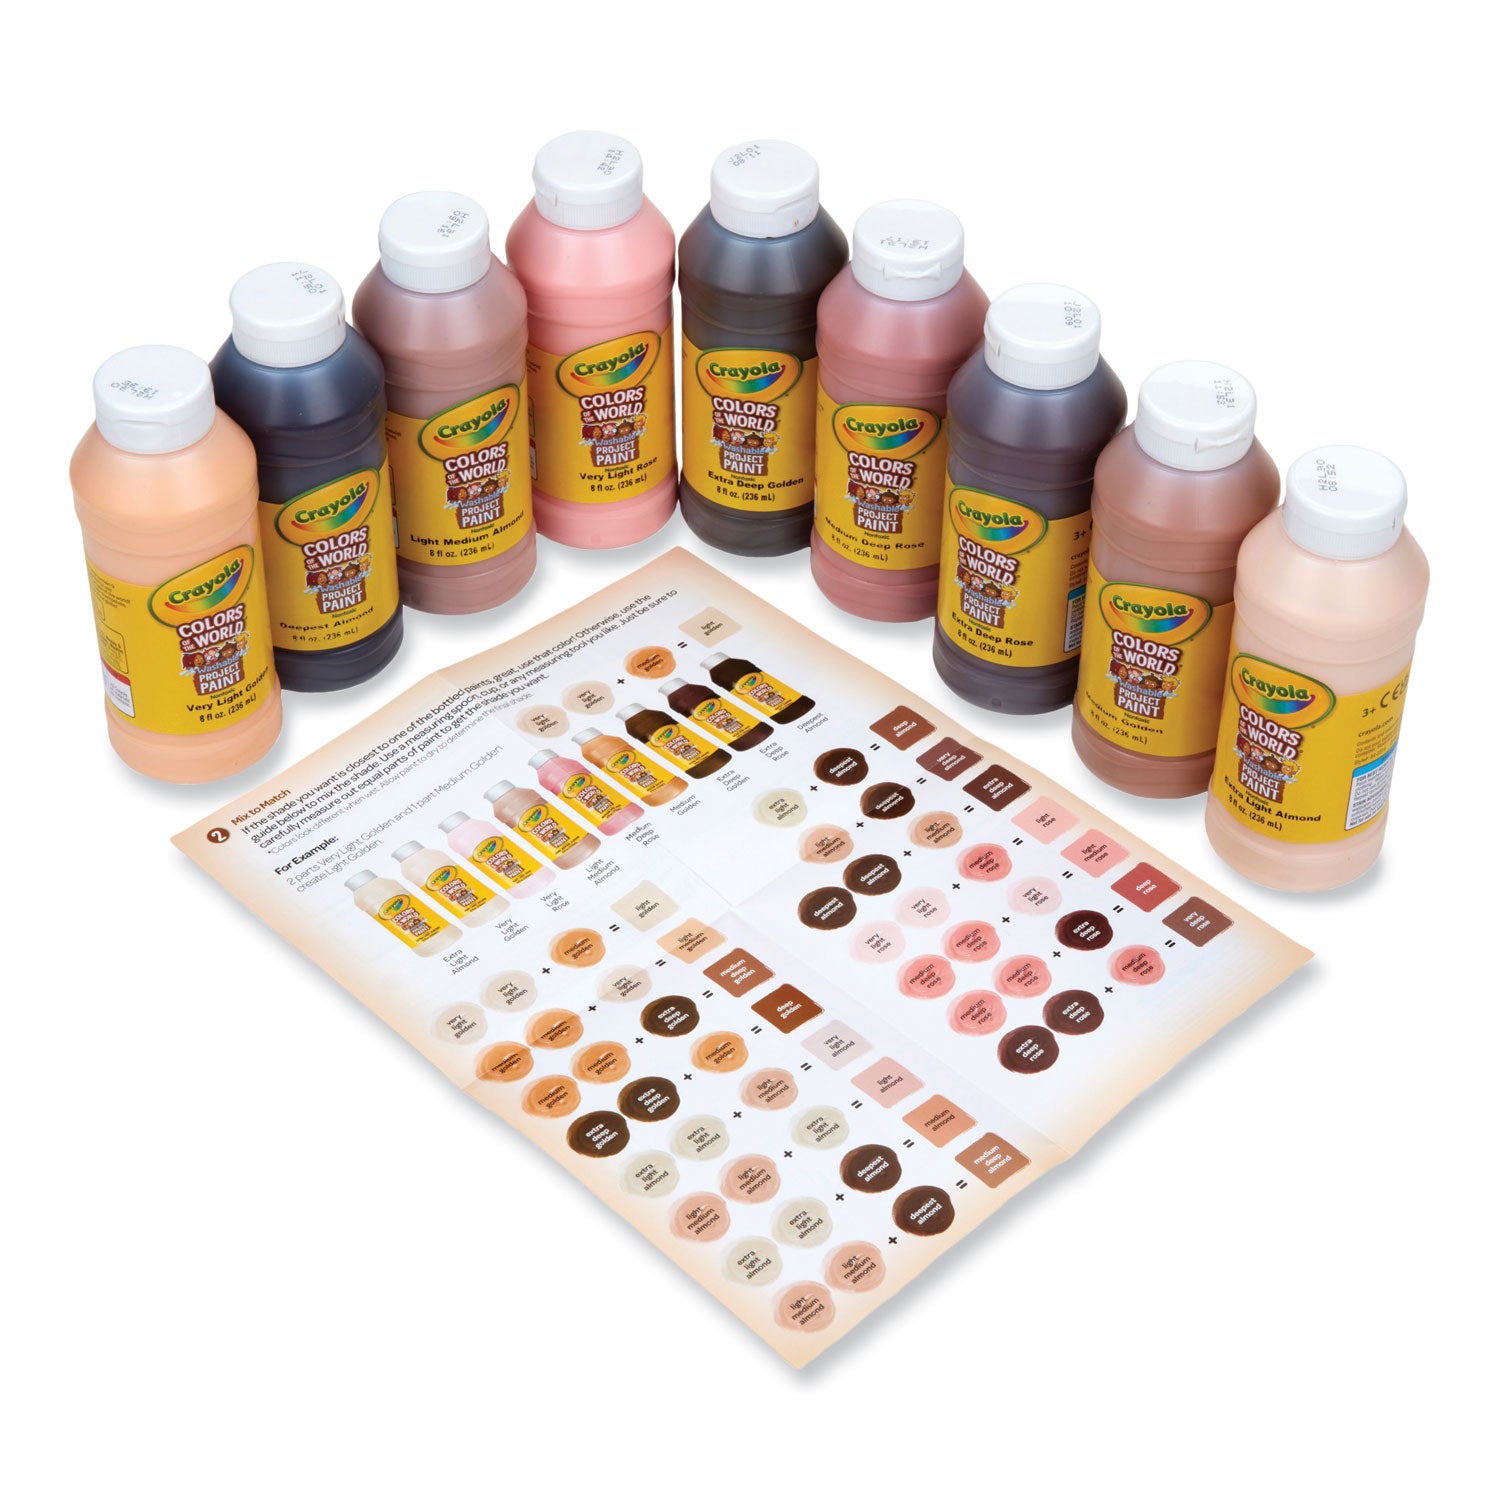 colors-of-the-world-washable-paint-9-assorted-colors-8-oz-bottles-9-pack_cyo542314 - 3